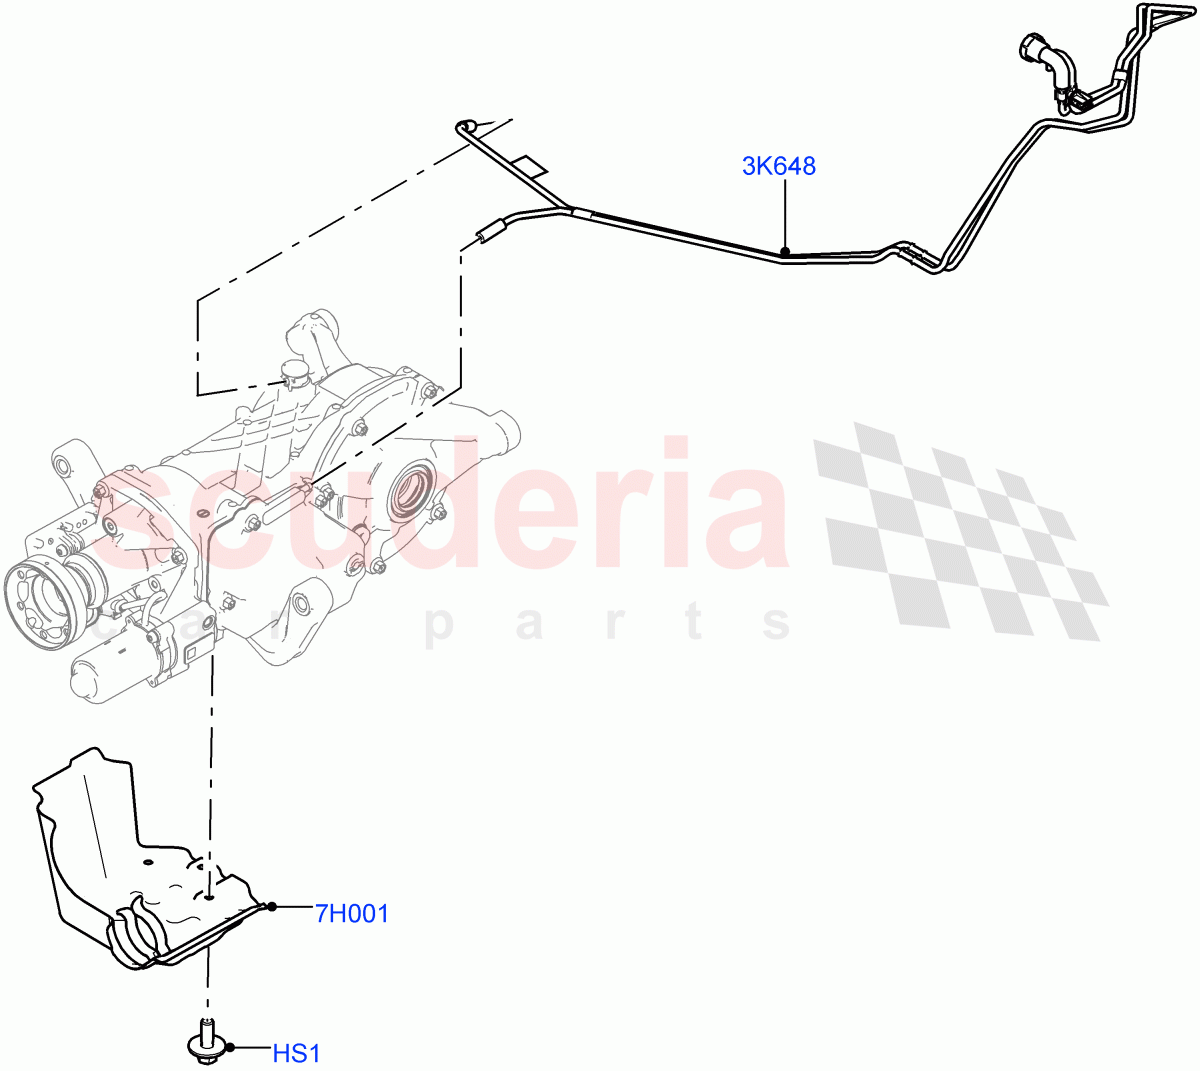 Rear Axle(Itatiaia (Brazil),Efficient Driveline)((V)FROMGT000001) of Land Rover Land Rover Range Rover Evoque (2012-2018) [2.0 Turbo Diesel]